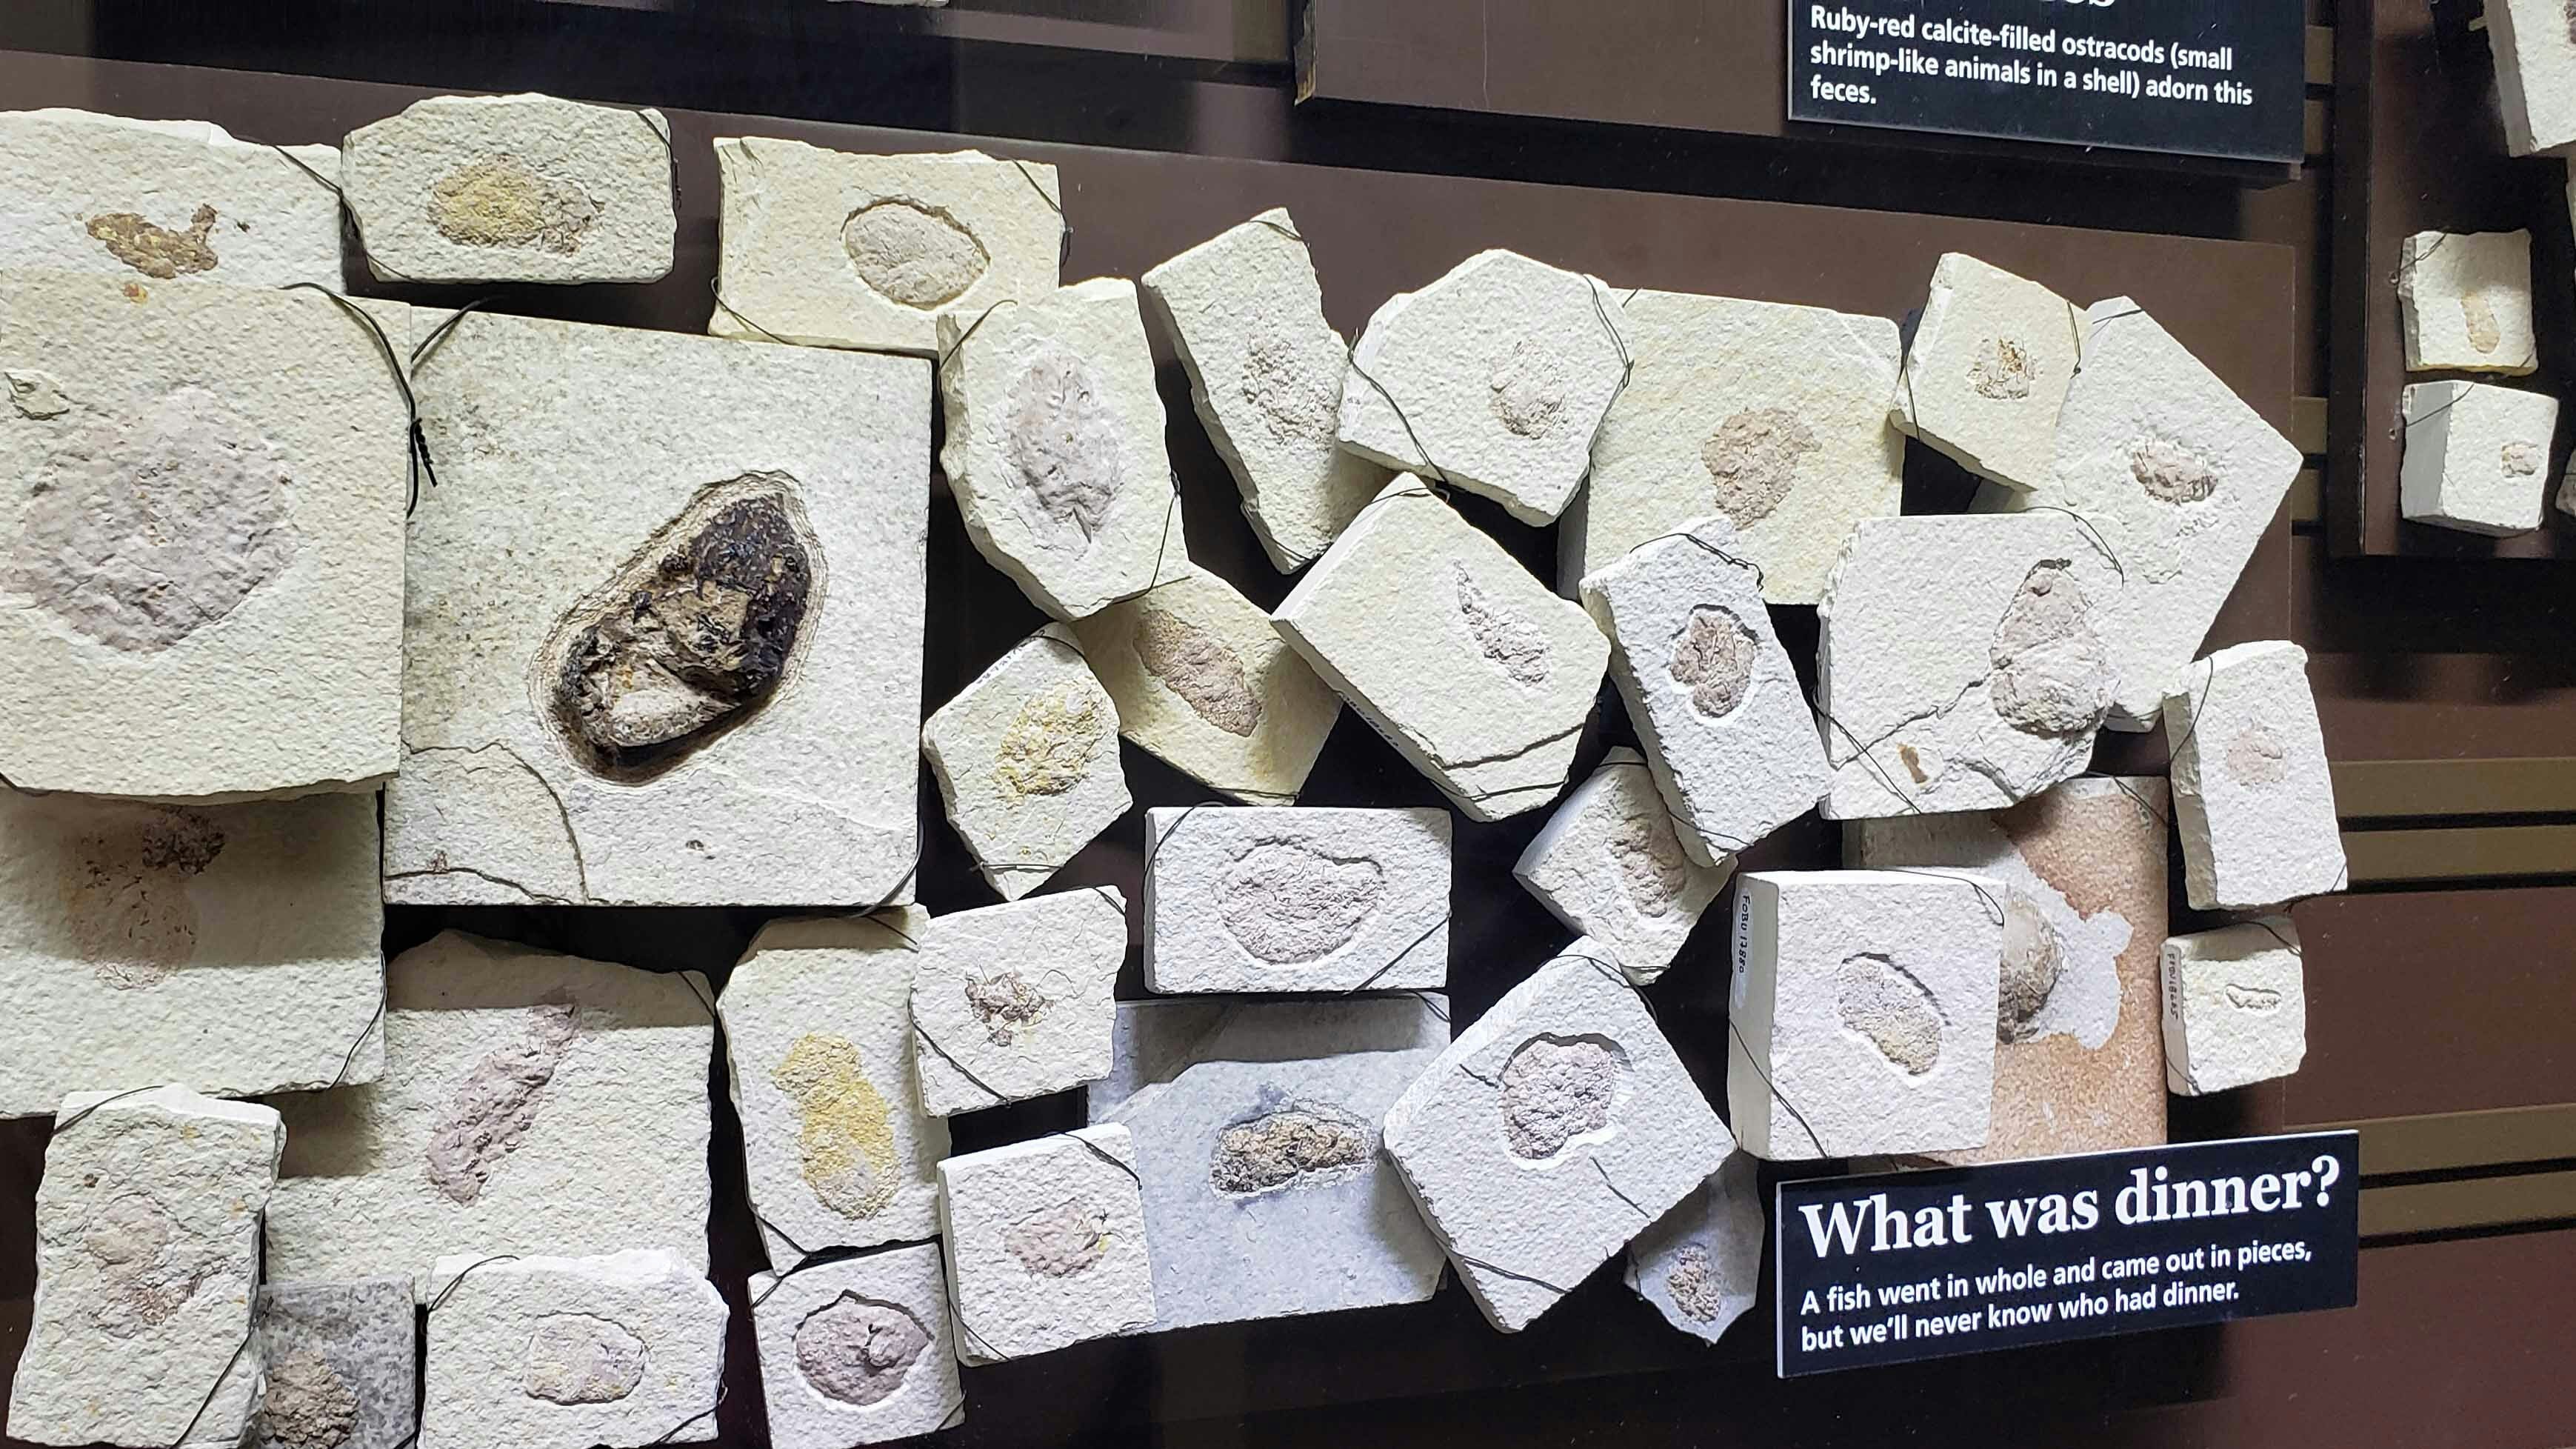 A variety of fossilized poop are displayed in the bathrooms